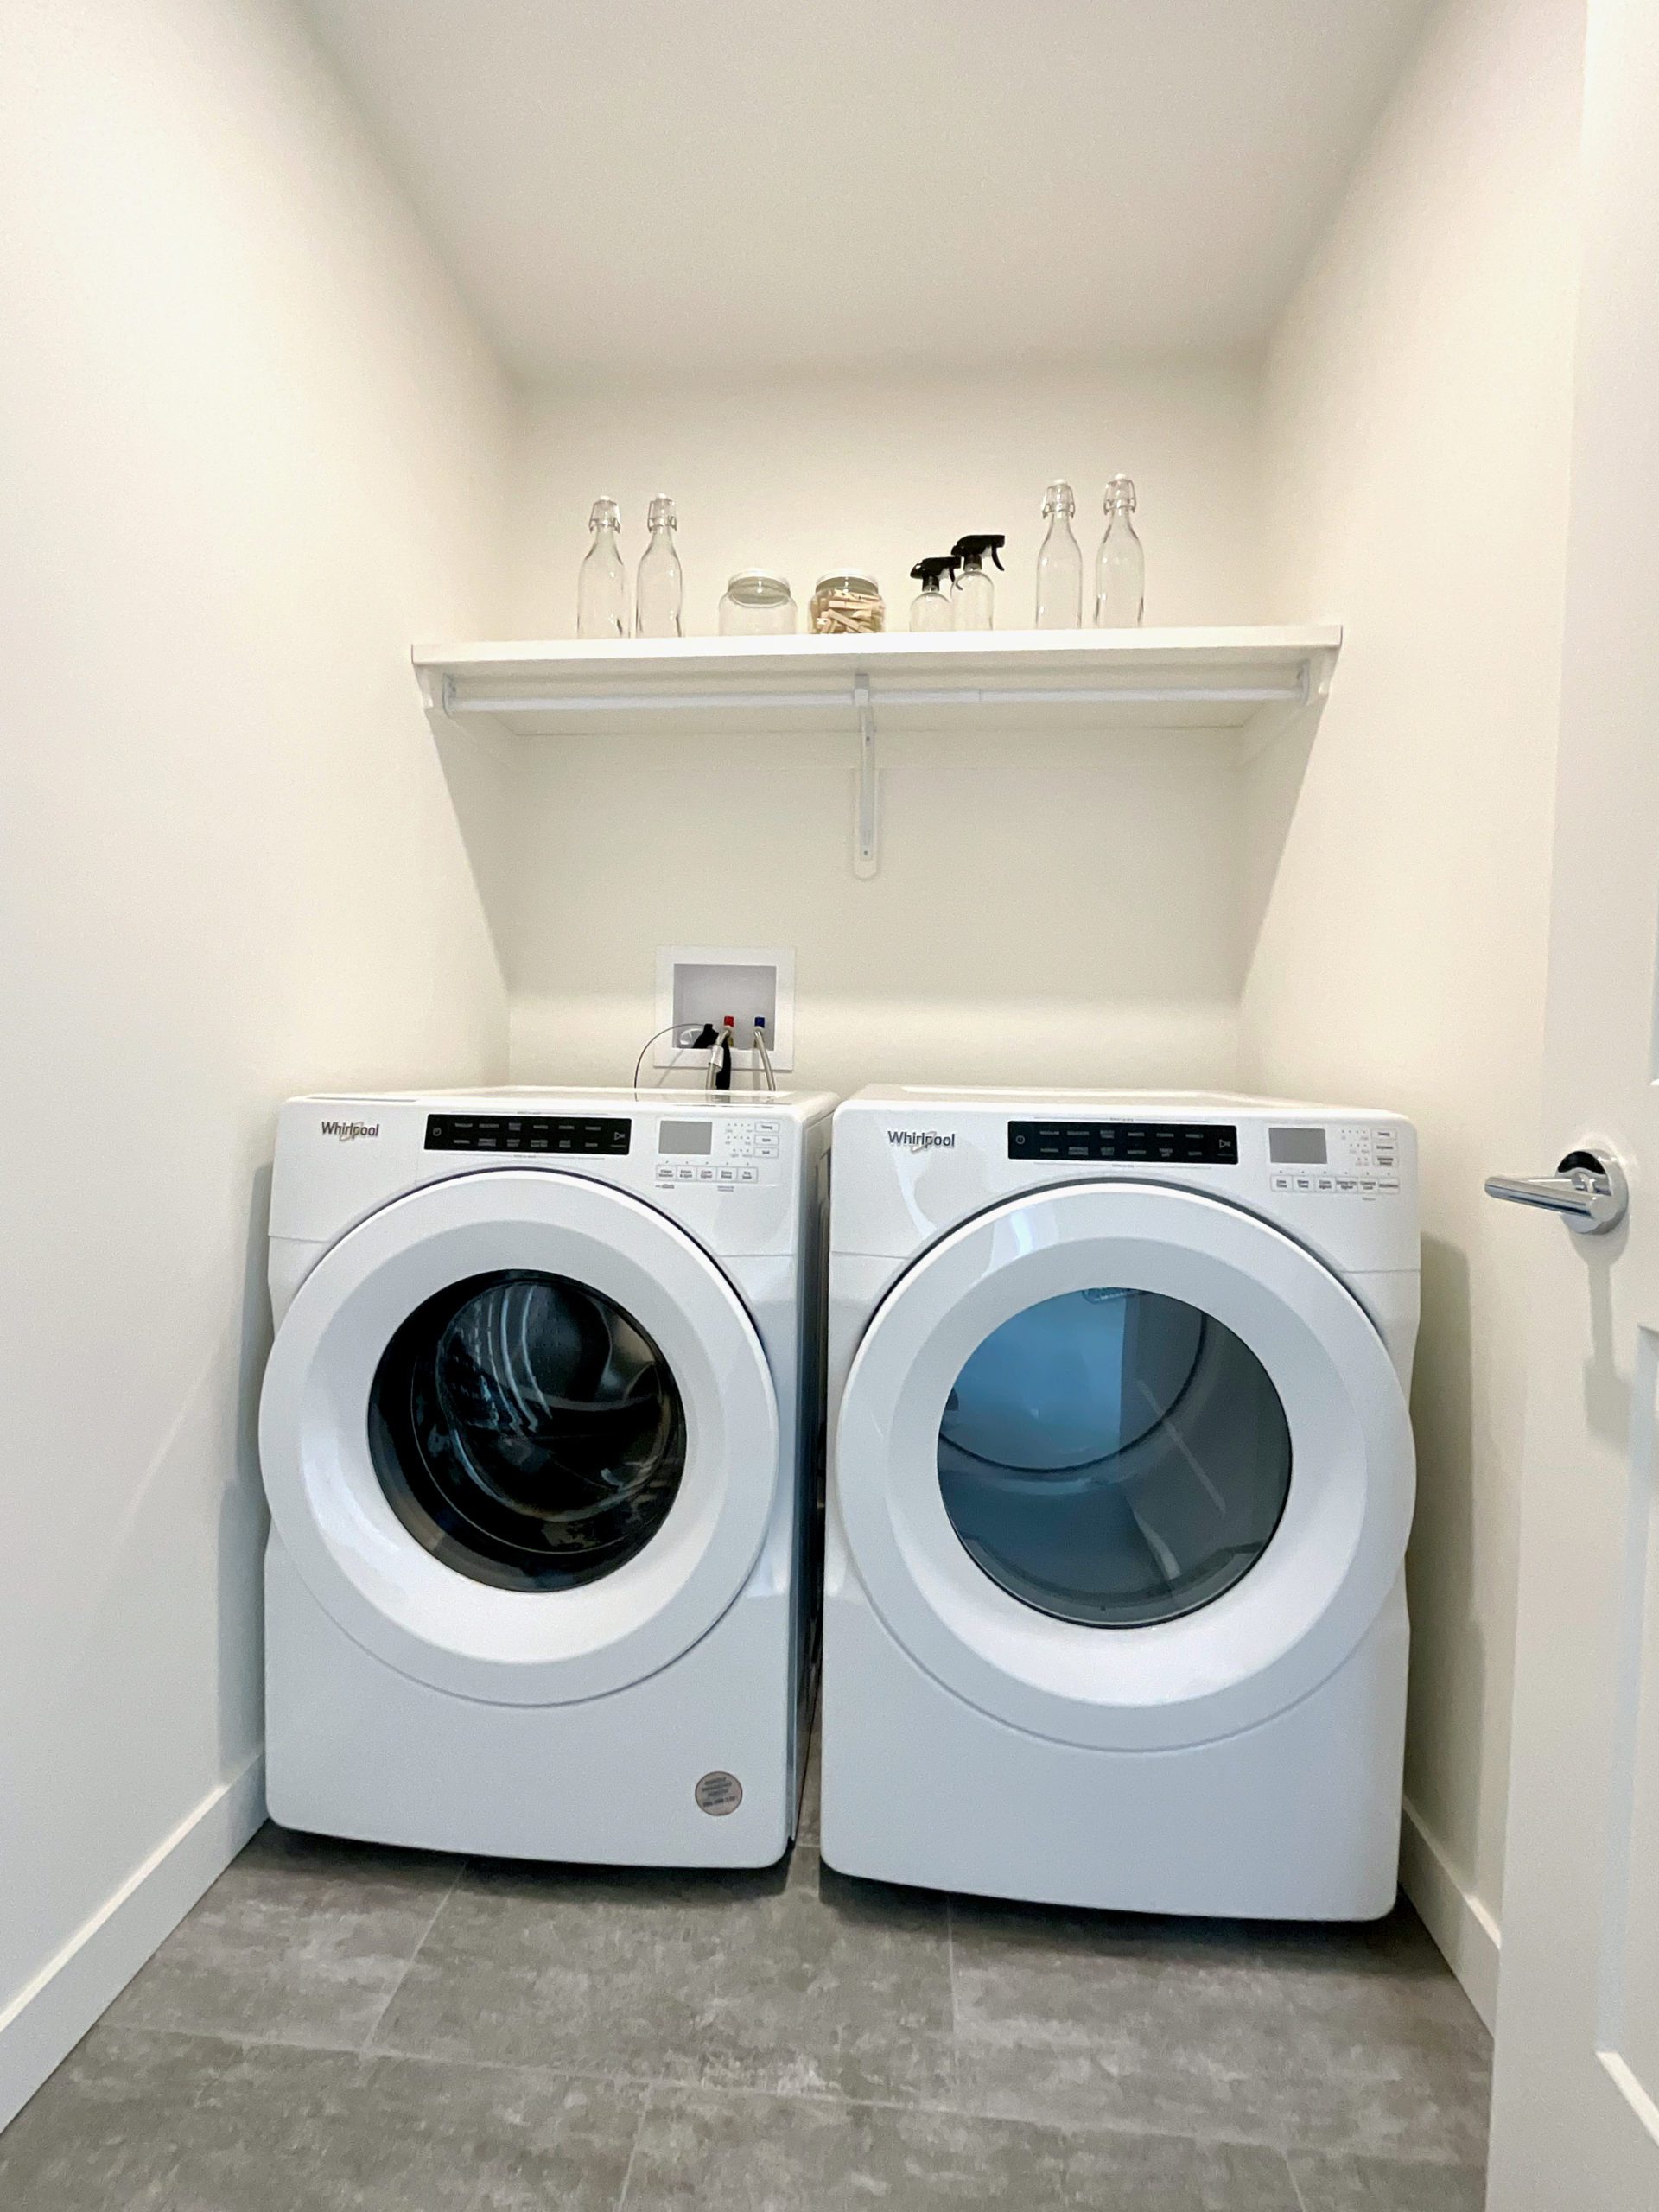 A laundry room with side-by-side front load washer and dryer.